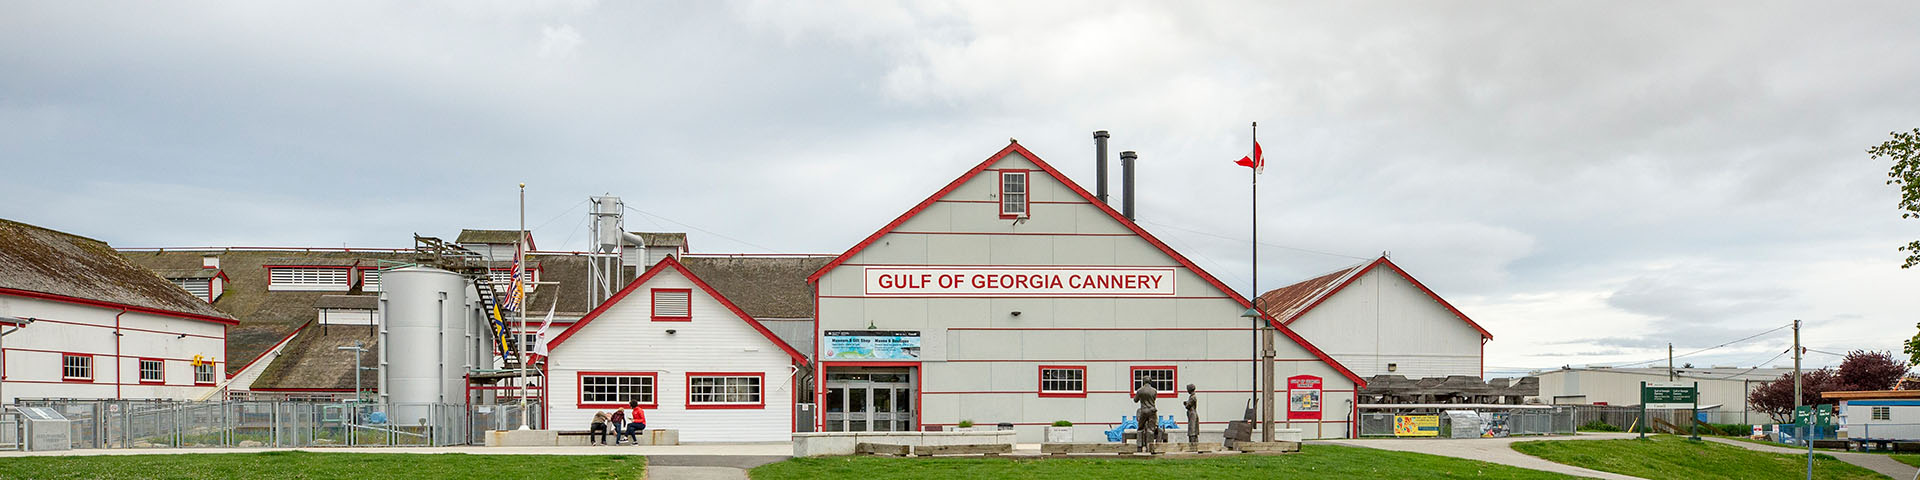 The Gulf of Georgia Cannery Building